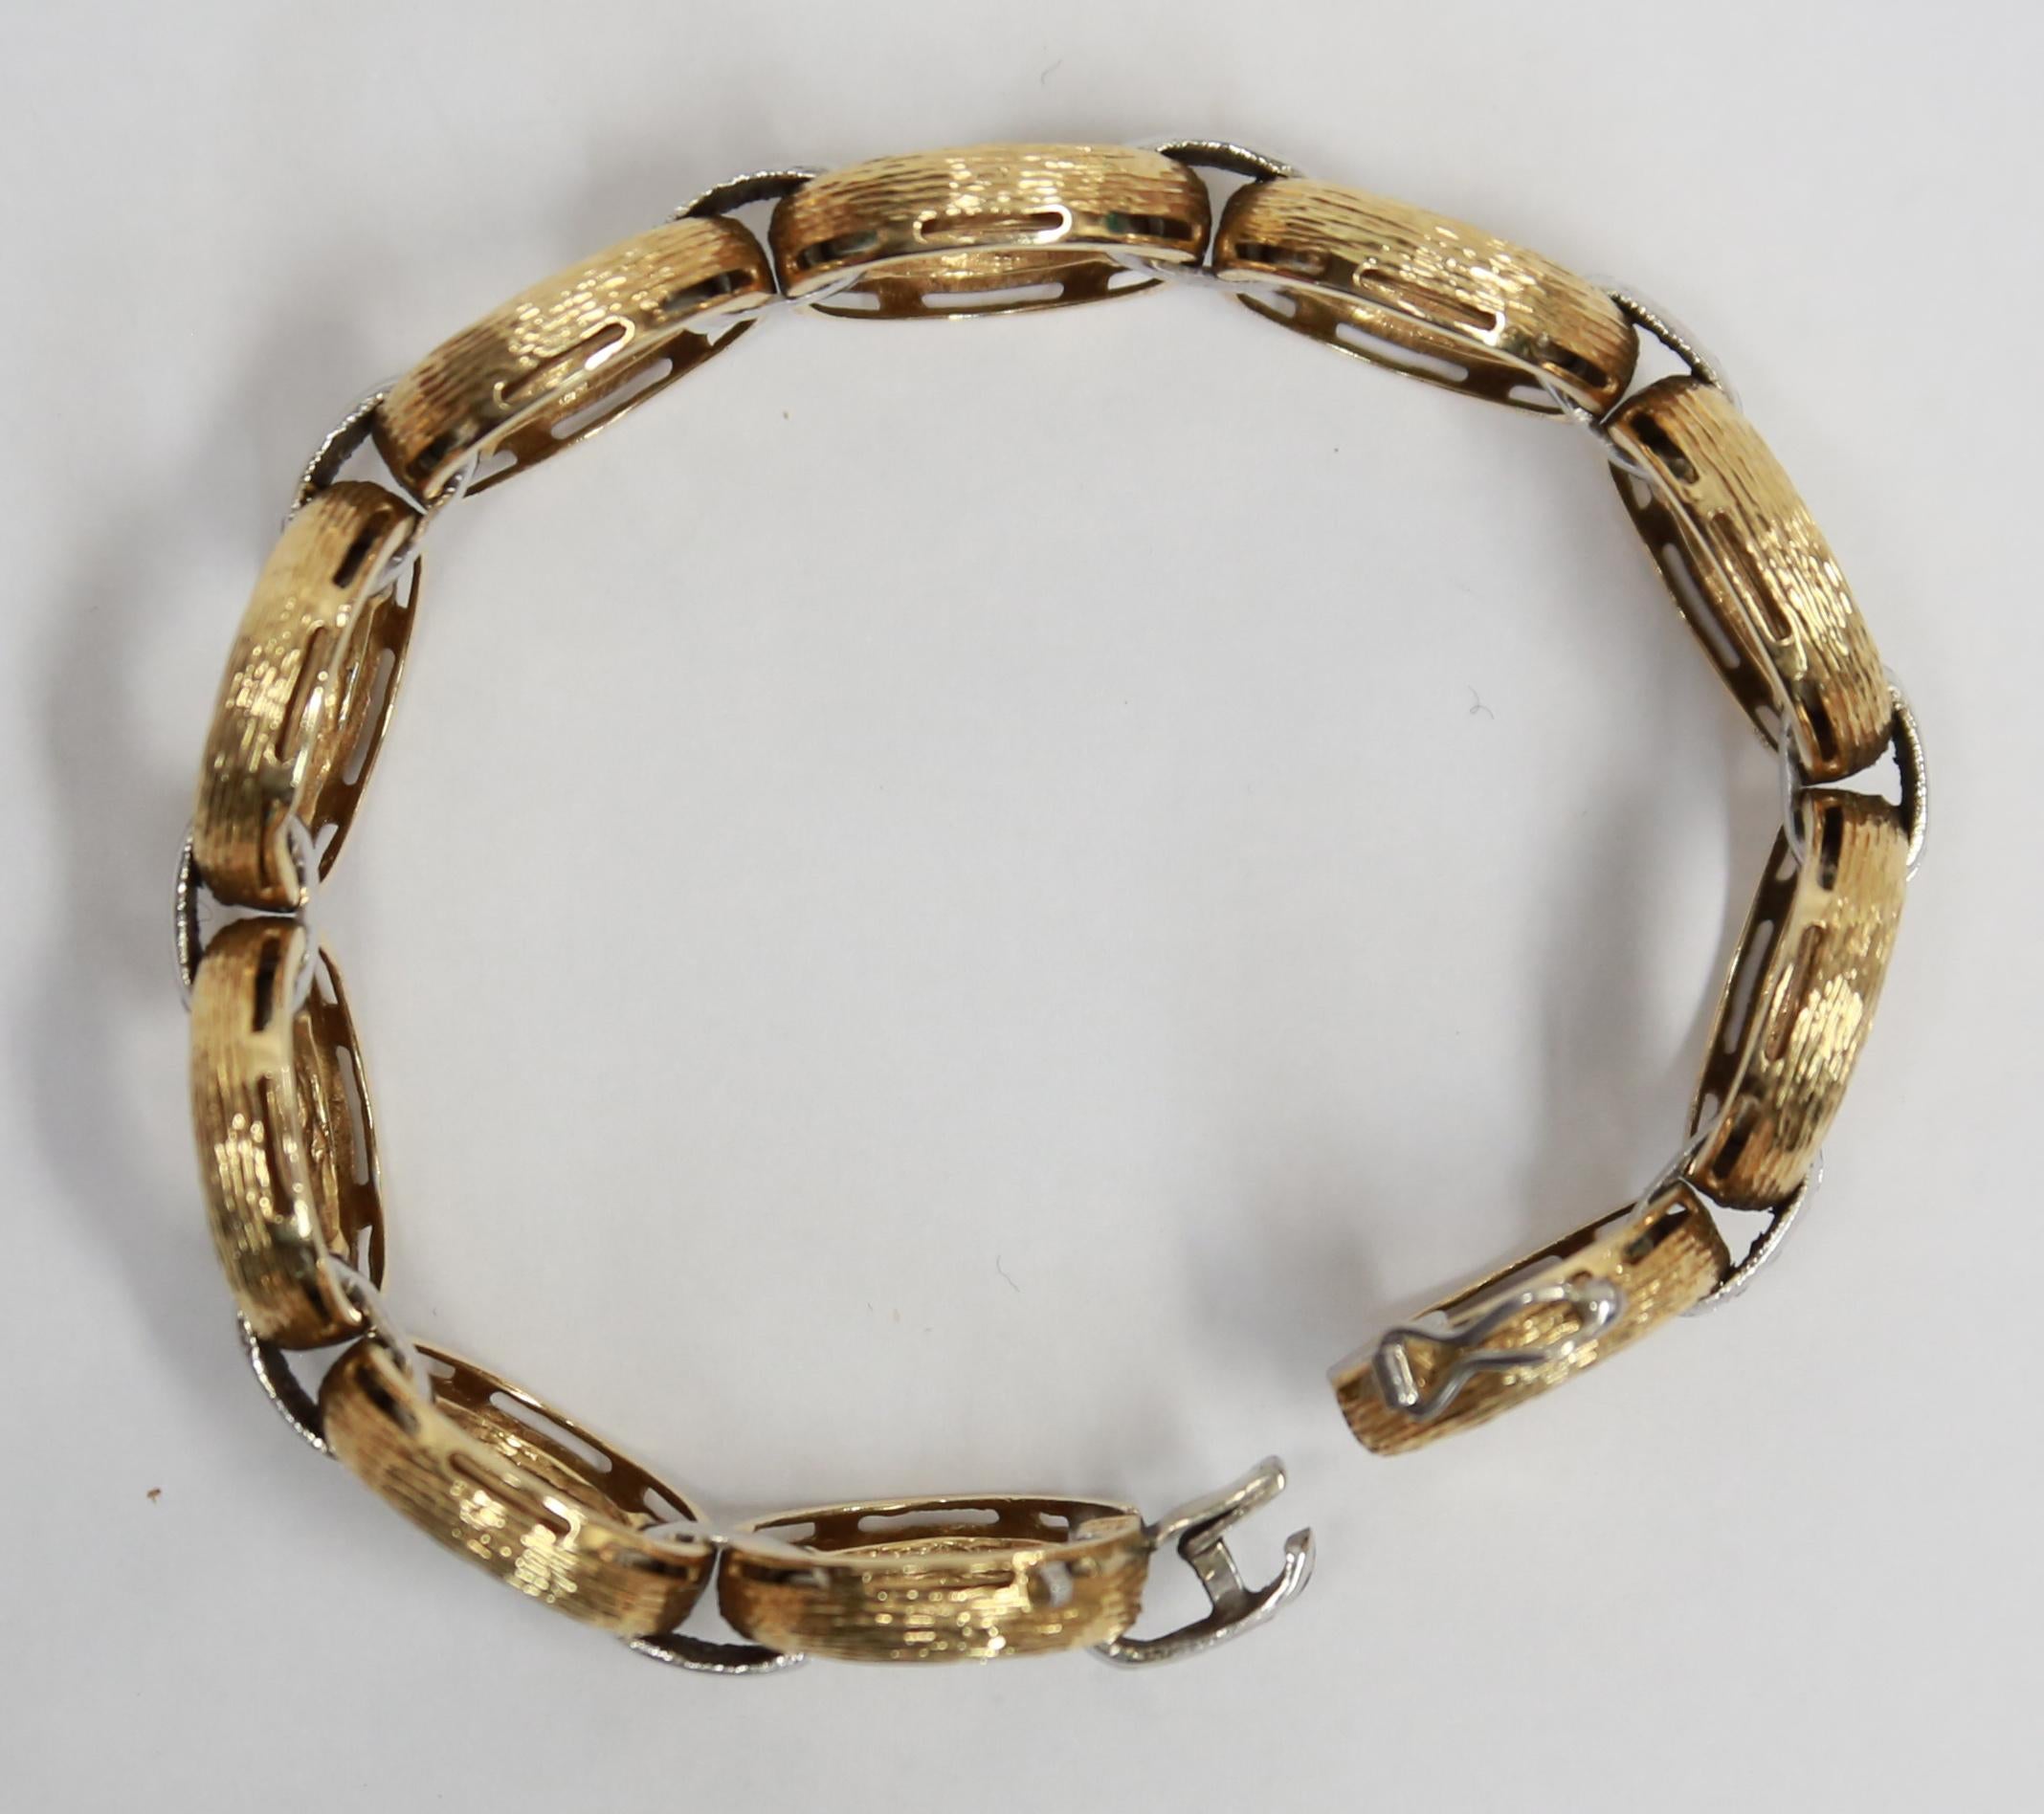 Beautiful Antique Circle and Diamond Bar Bracelet. Hand brushed yellow gold circles inter-spaced with Diamond set white Gold bars. Hand crafted in 18 Karat yellow Gold. Marked: 750 (European standard for 18K Gold). Bracelet measures approx.  7.5